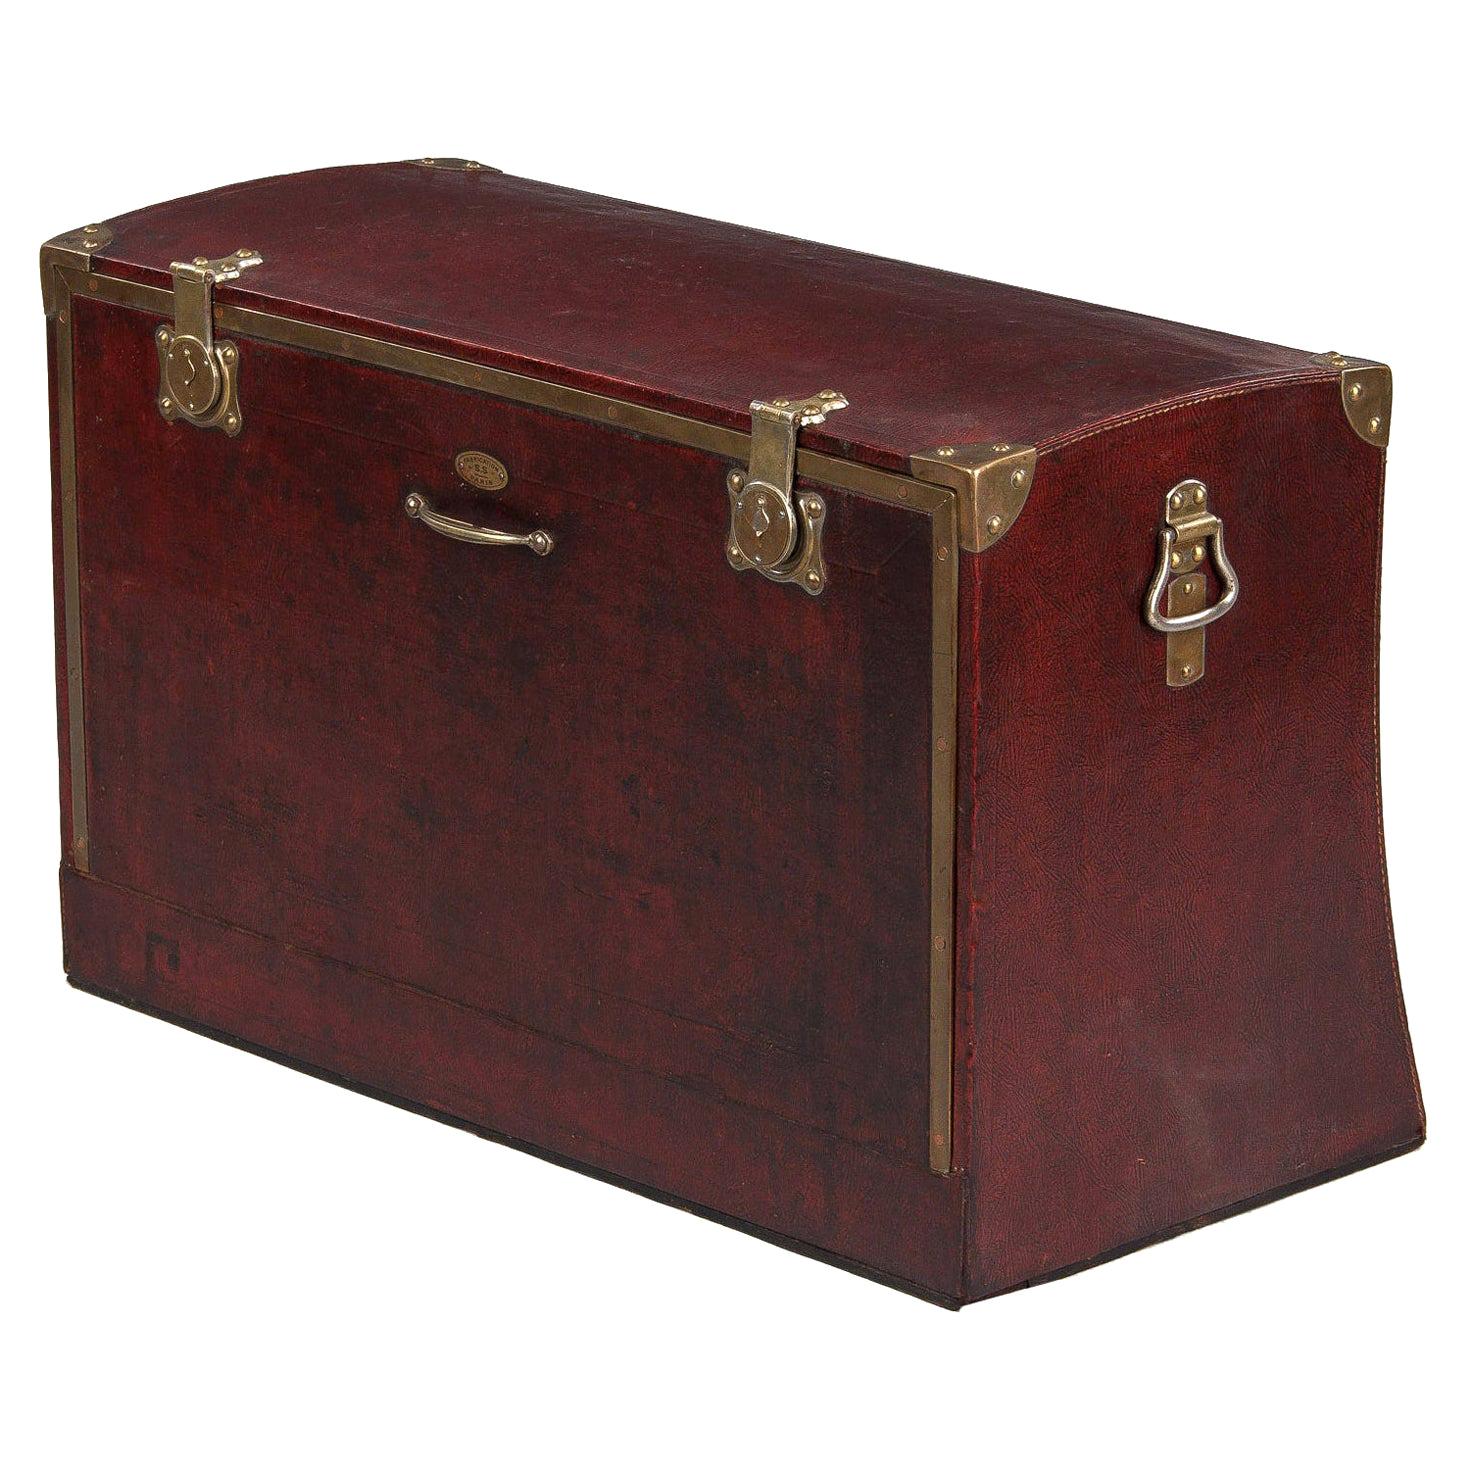 Antique French Automobile Trunk, Early 1900s